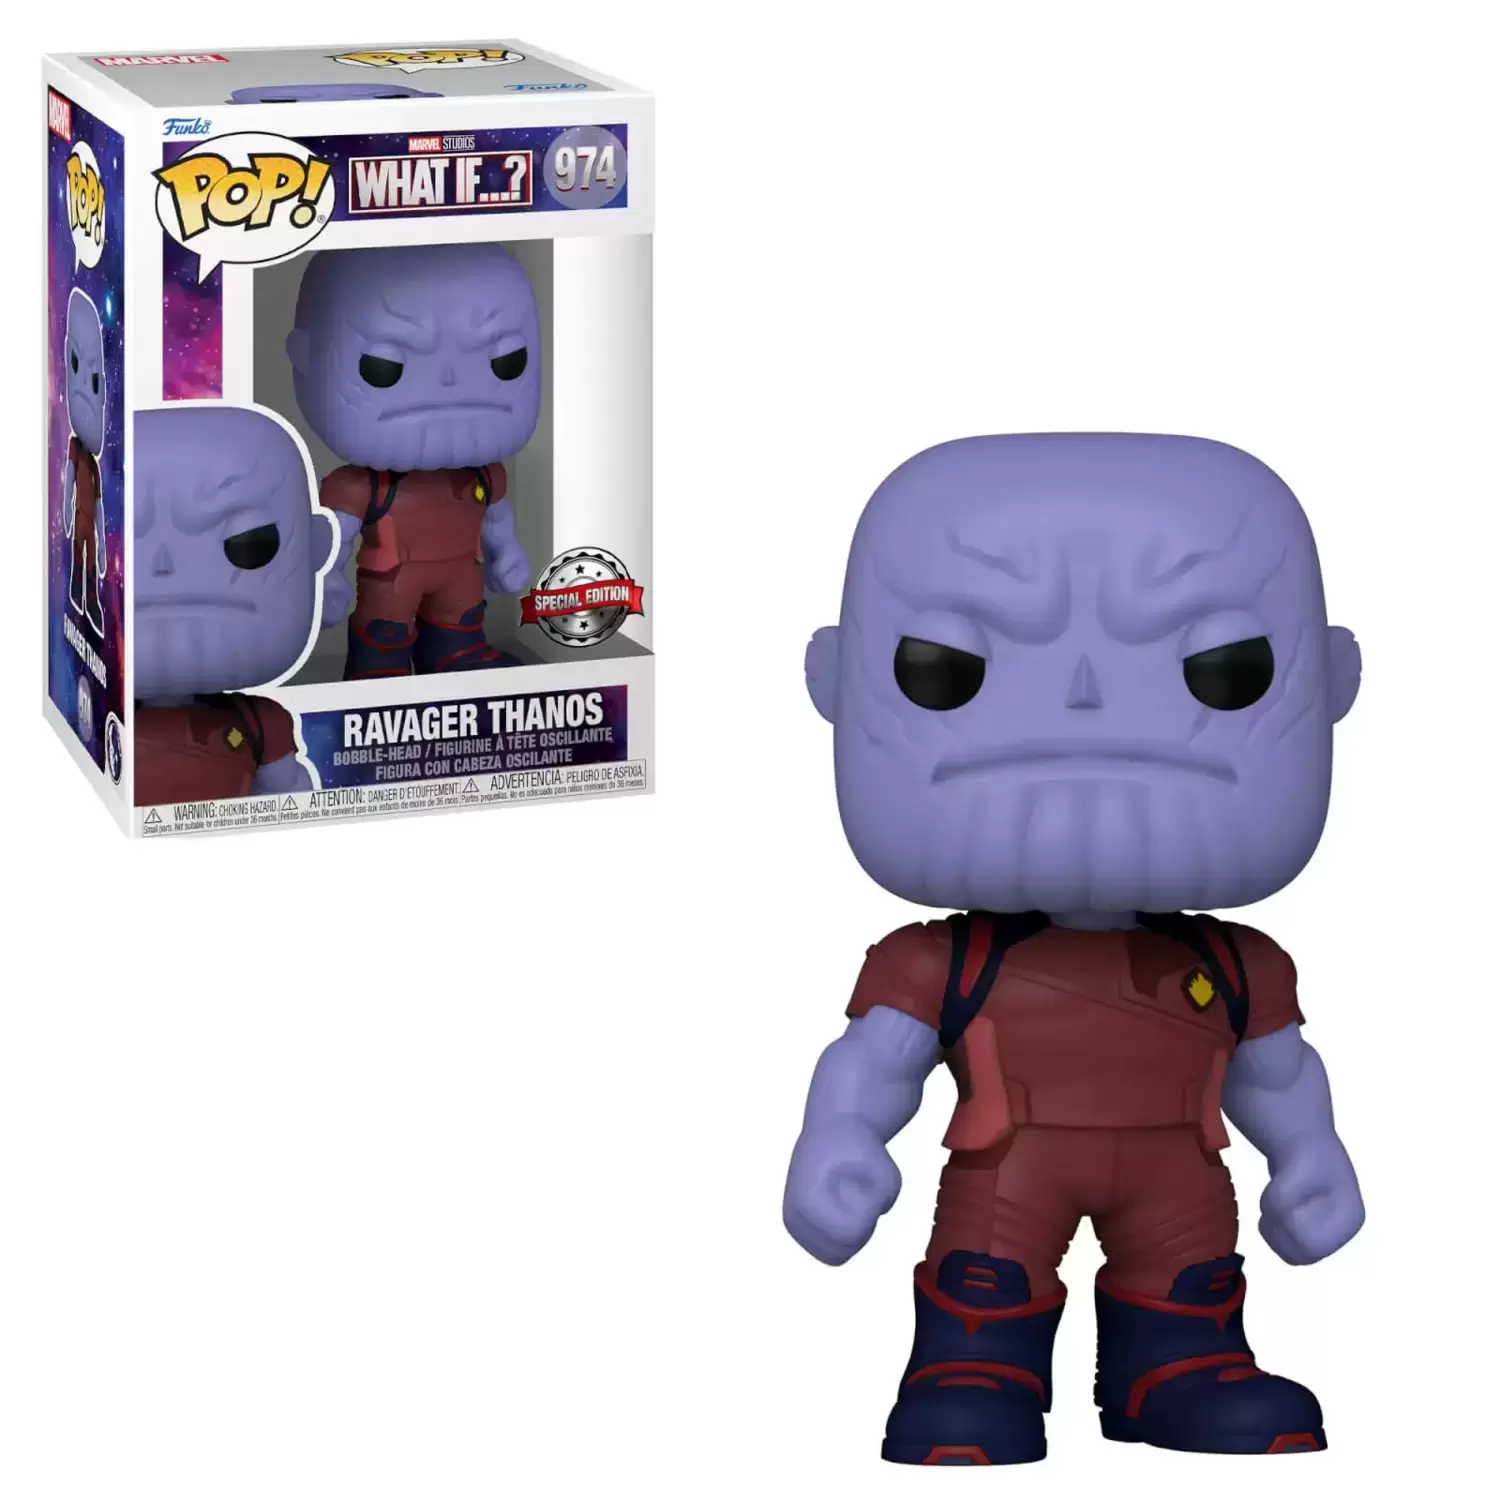 POP! MARVEL - What if....? - Ravager Thanos